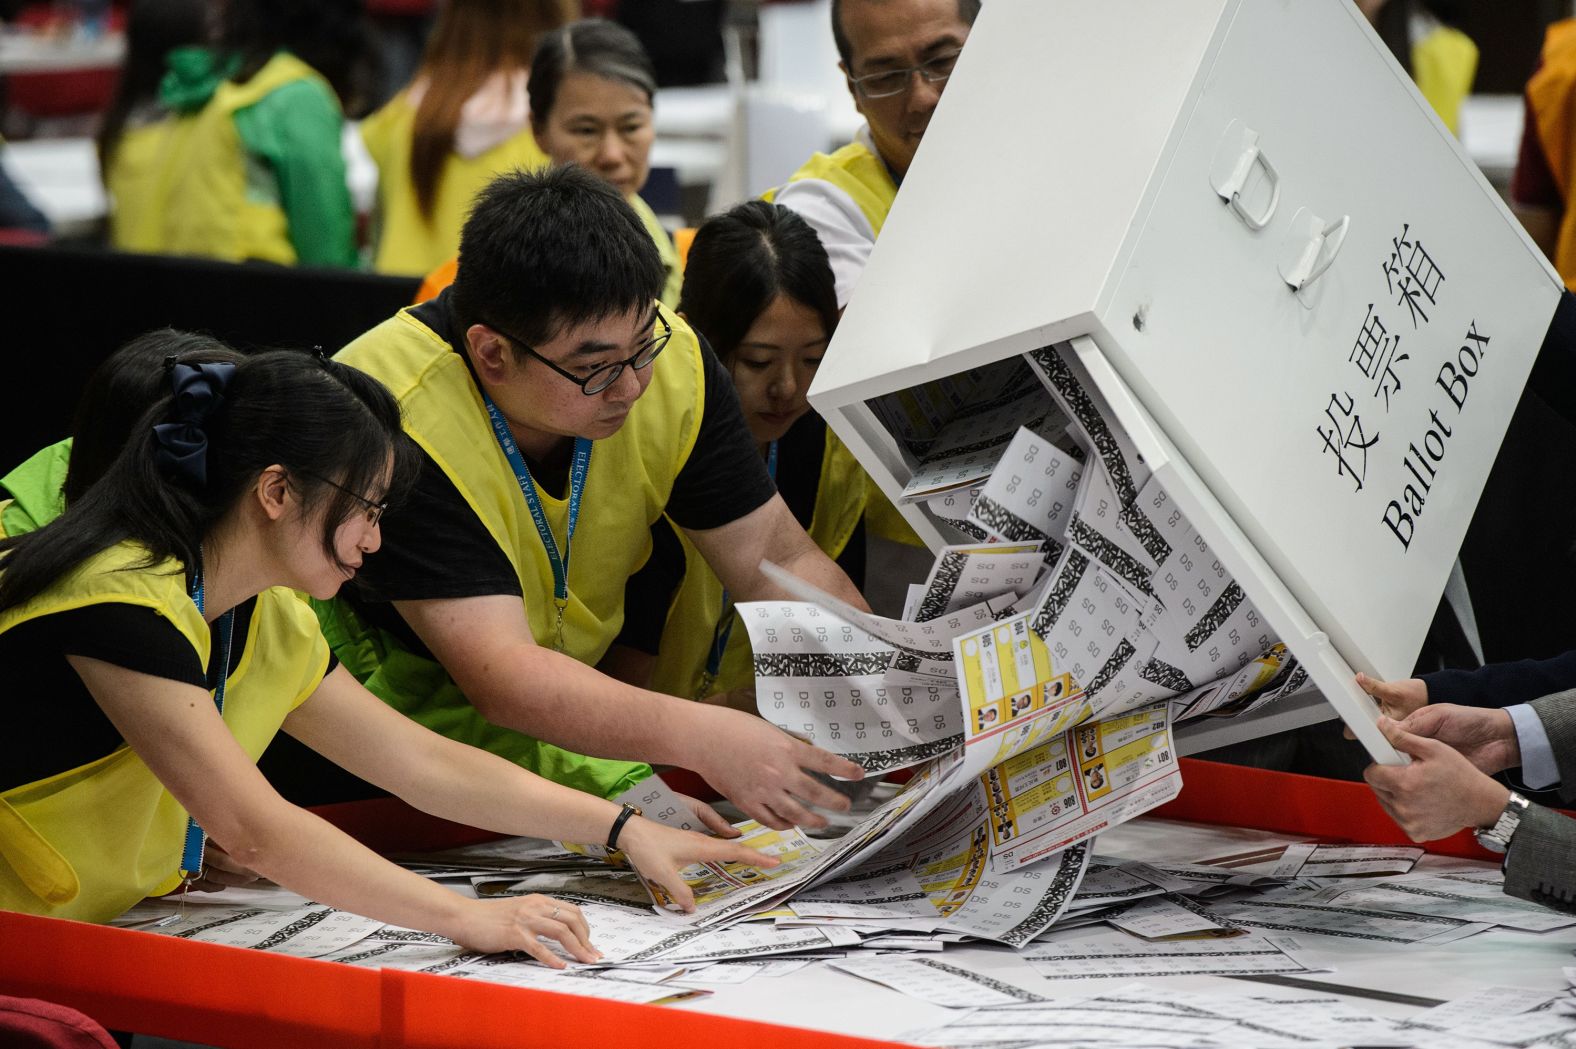 Election officials empty a ballot box for counting after voting stations closed for the Legislative Council election in Hong Kong in 2016.